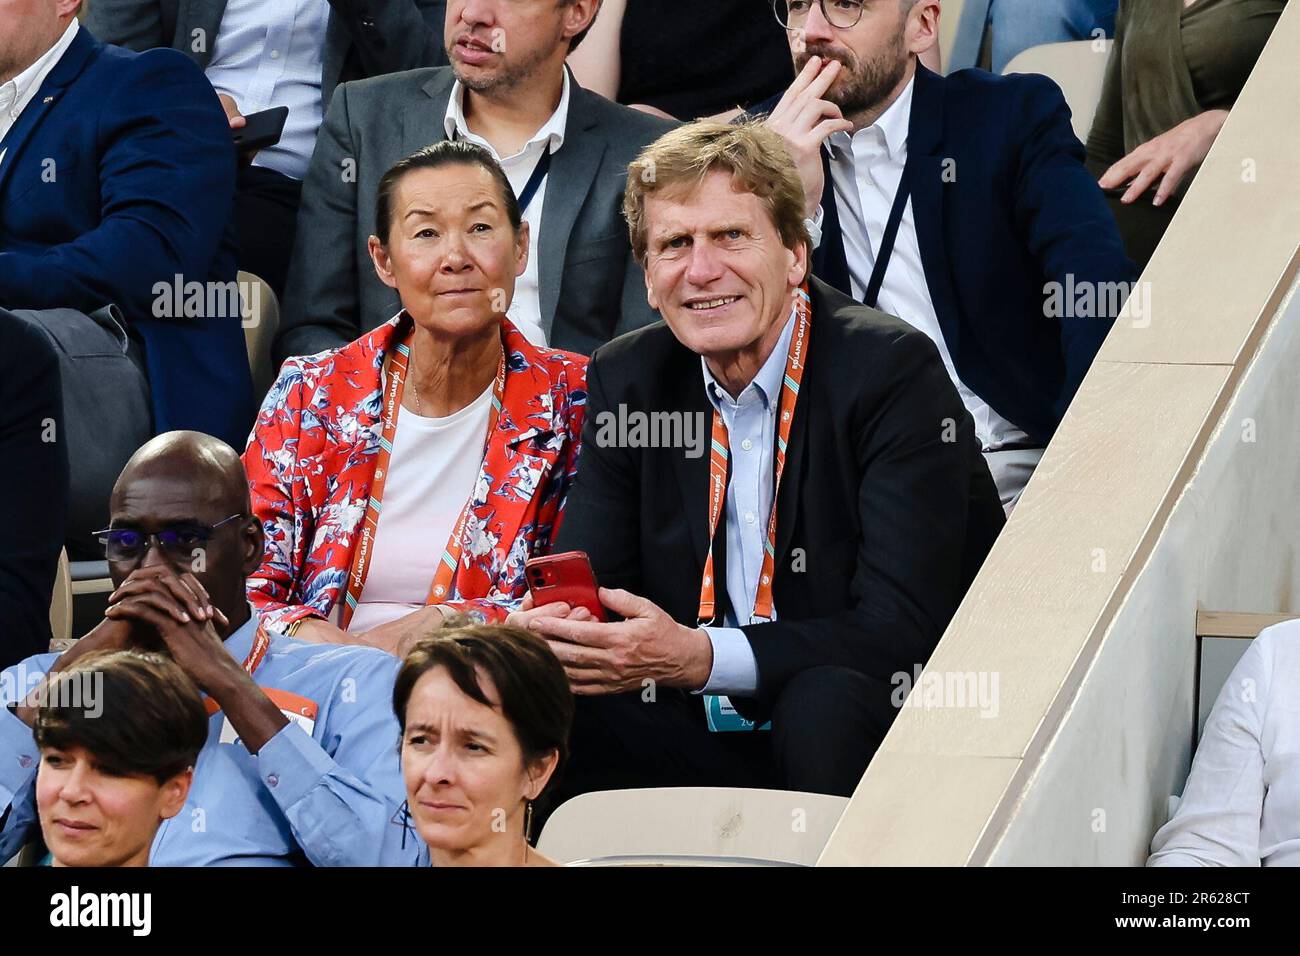 Paris, France. 6th June, 2023. Dietloff von Arnim (r) sits in the stands. The President of the German Tennis Federation (DTB) is standing in the election for the presidency of the International Tennis Federation (ITF) on 24 September 2023. Frank Molter/Alamy Live news Stock Photo